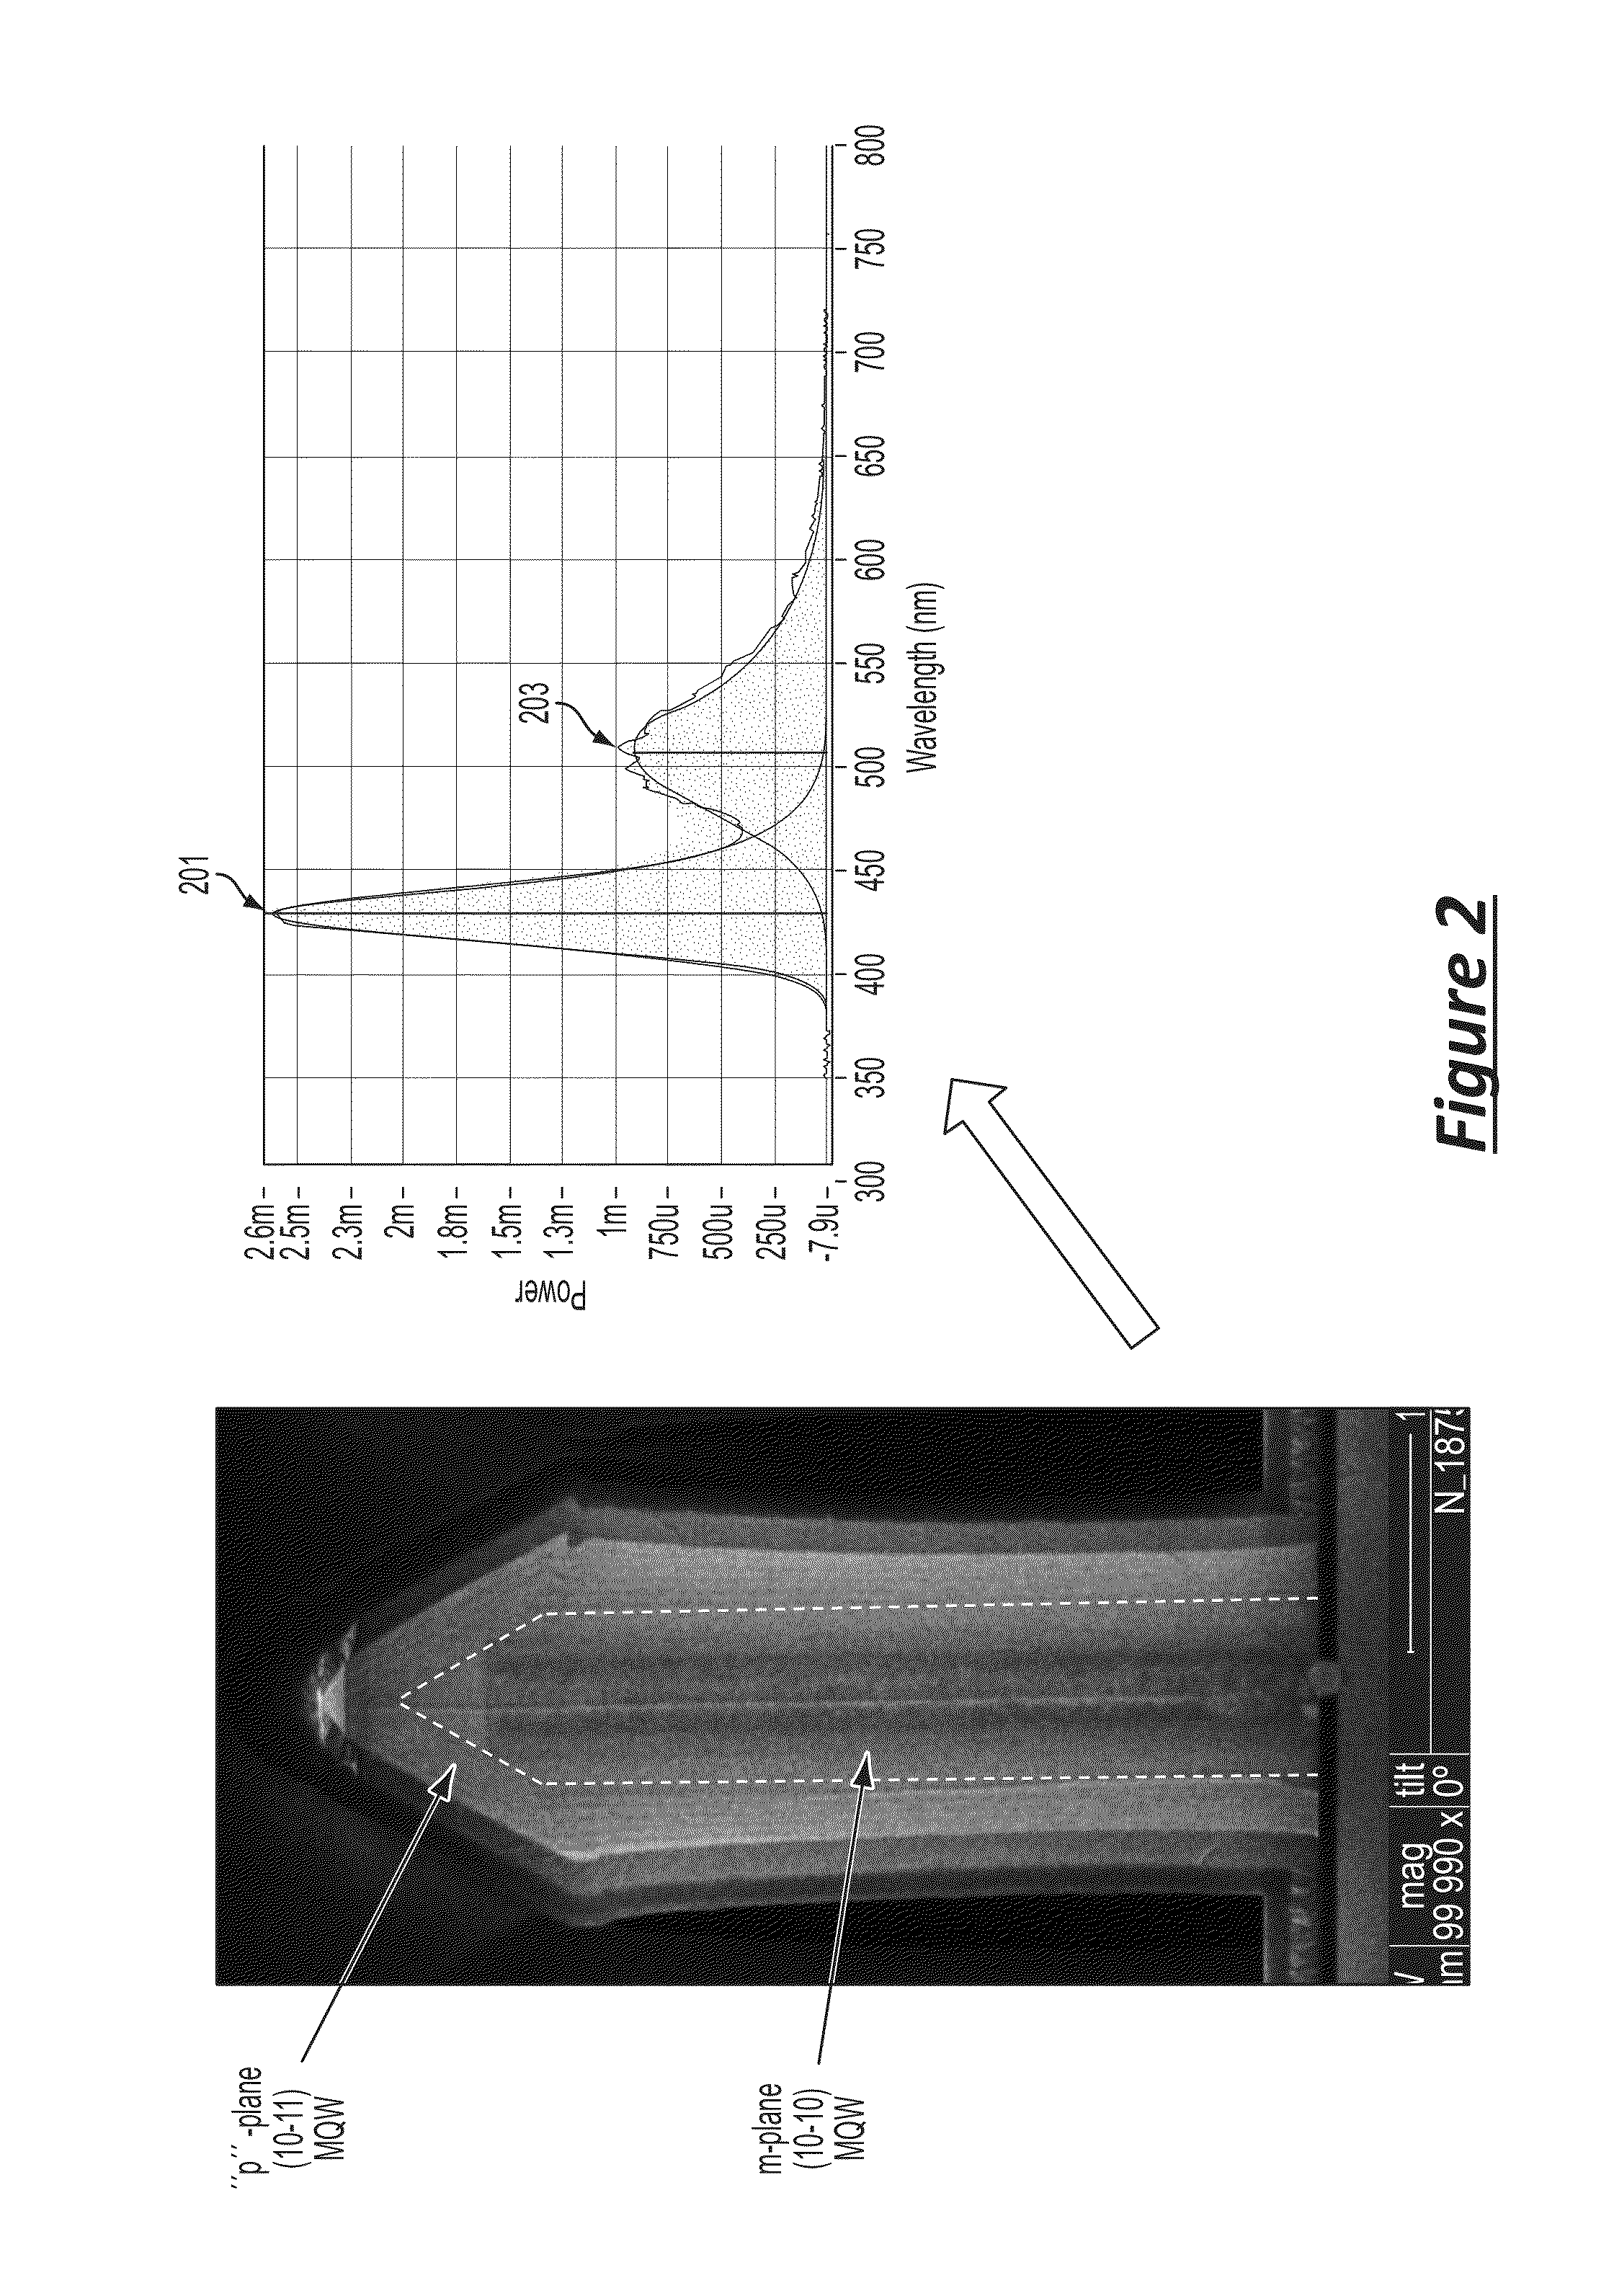 Nanowire Sized Opto-Electronic Structure and Method for Modifying Selected Portions of Same